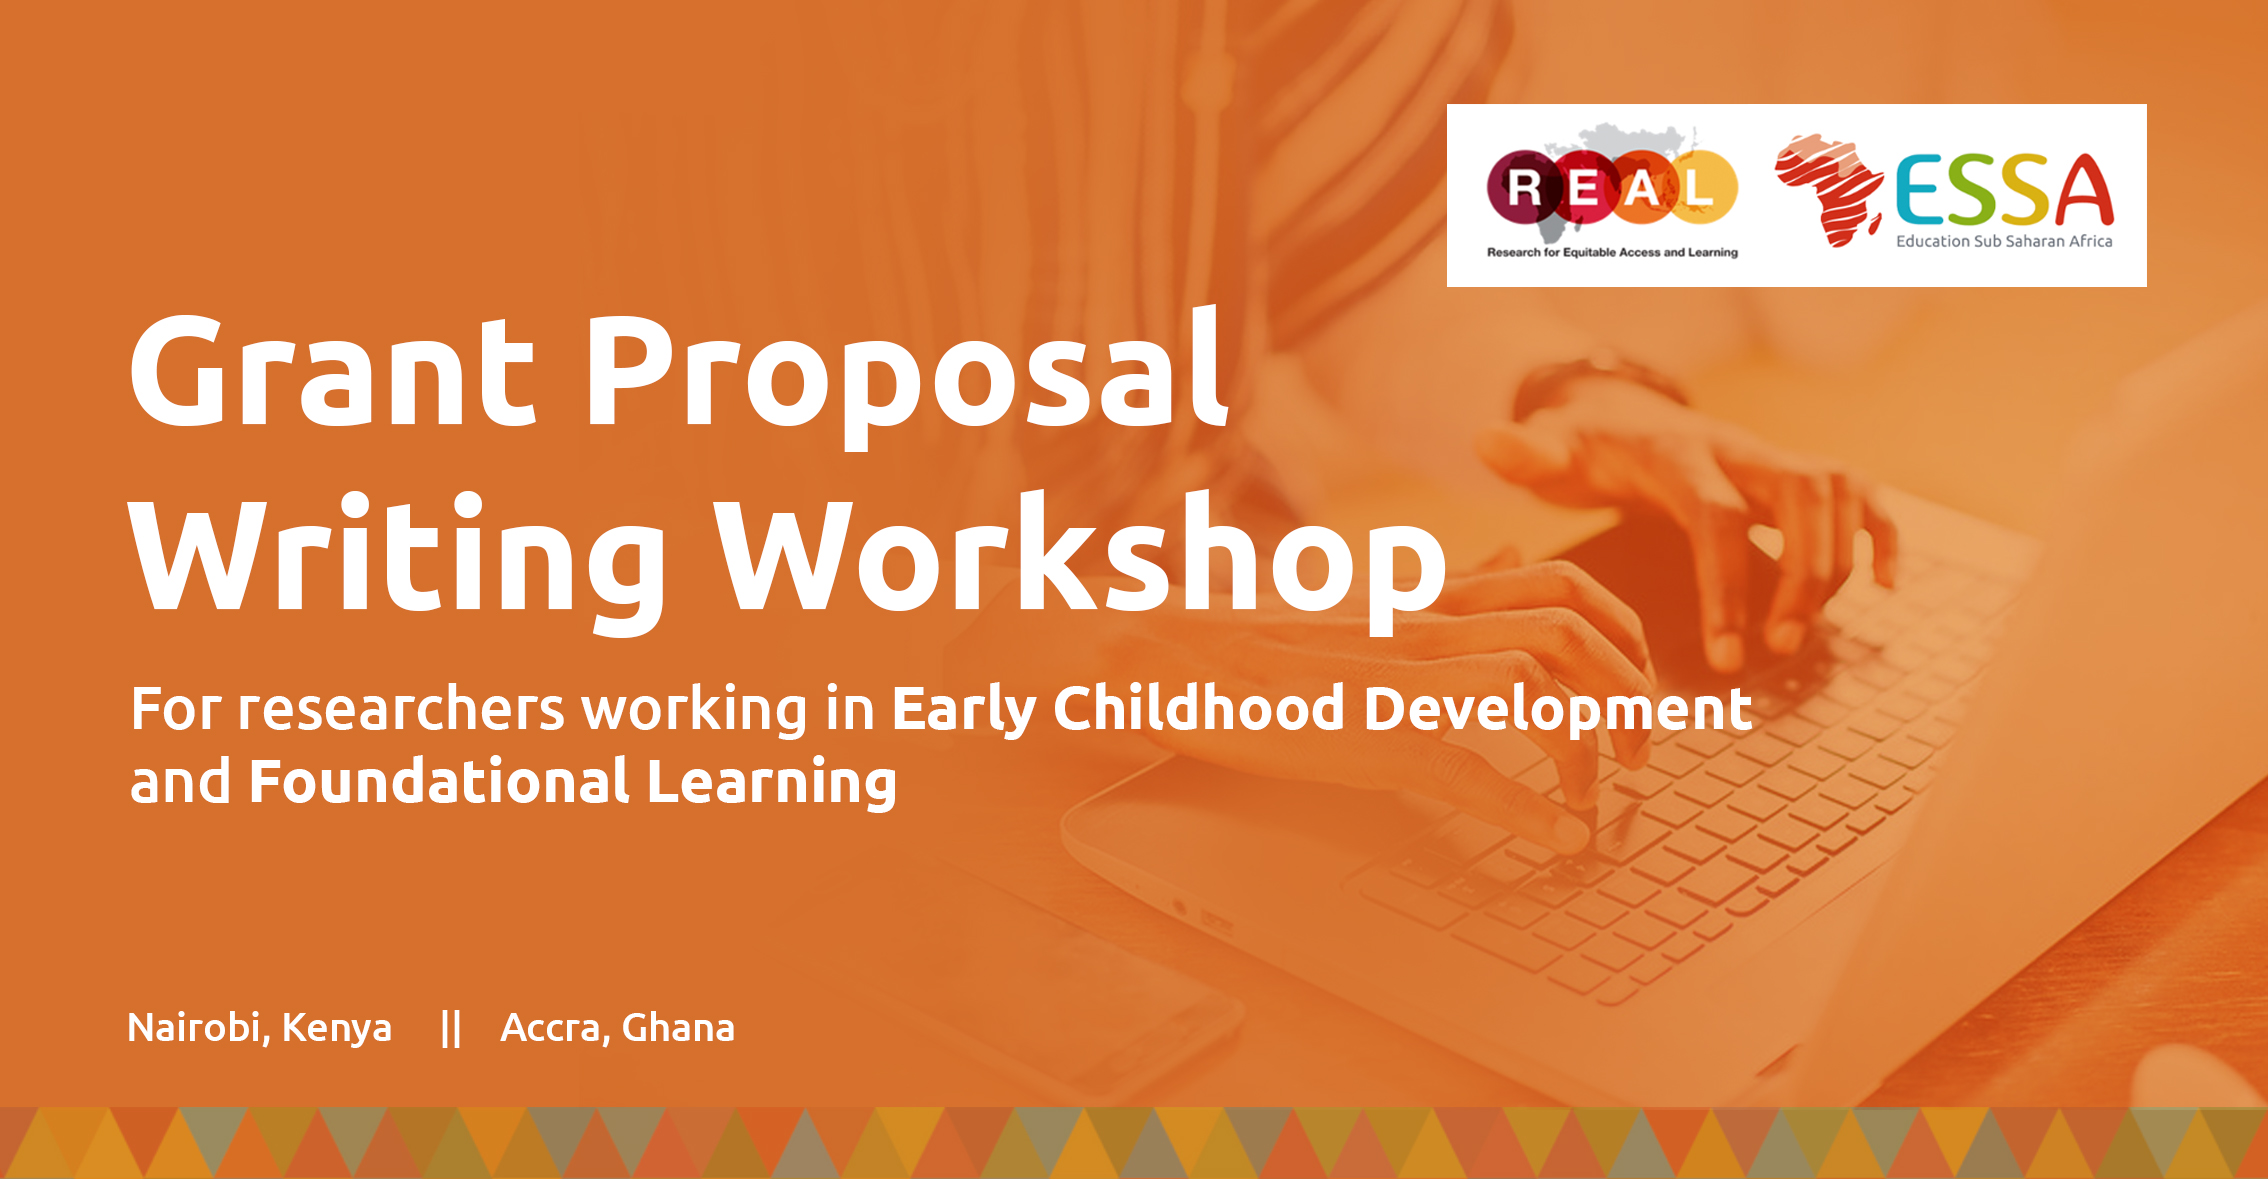 Grant Proposal Writing Workshops for Early Childhood Development and Foundational Learning Researchers